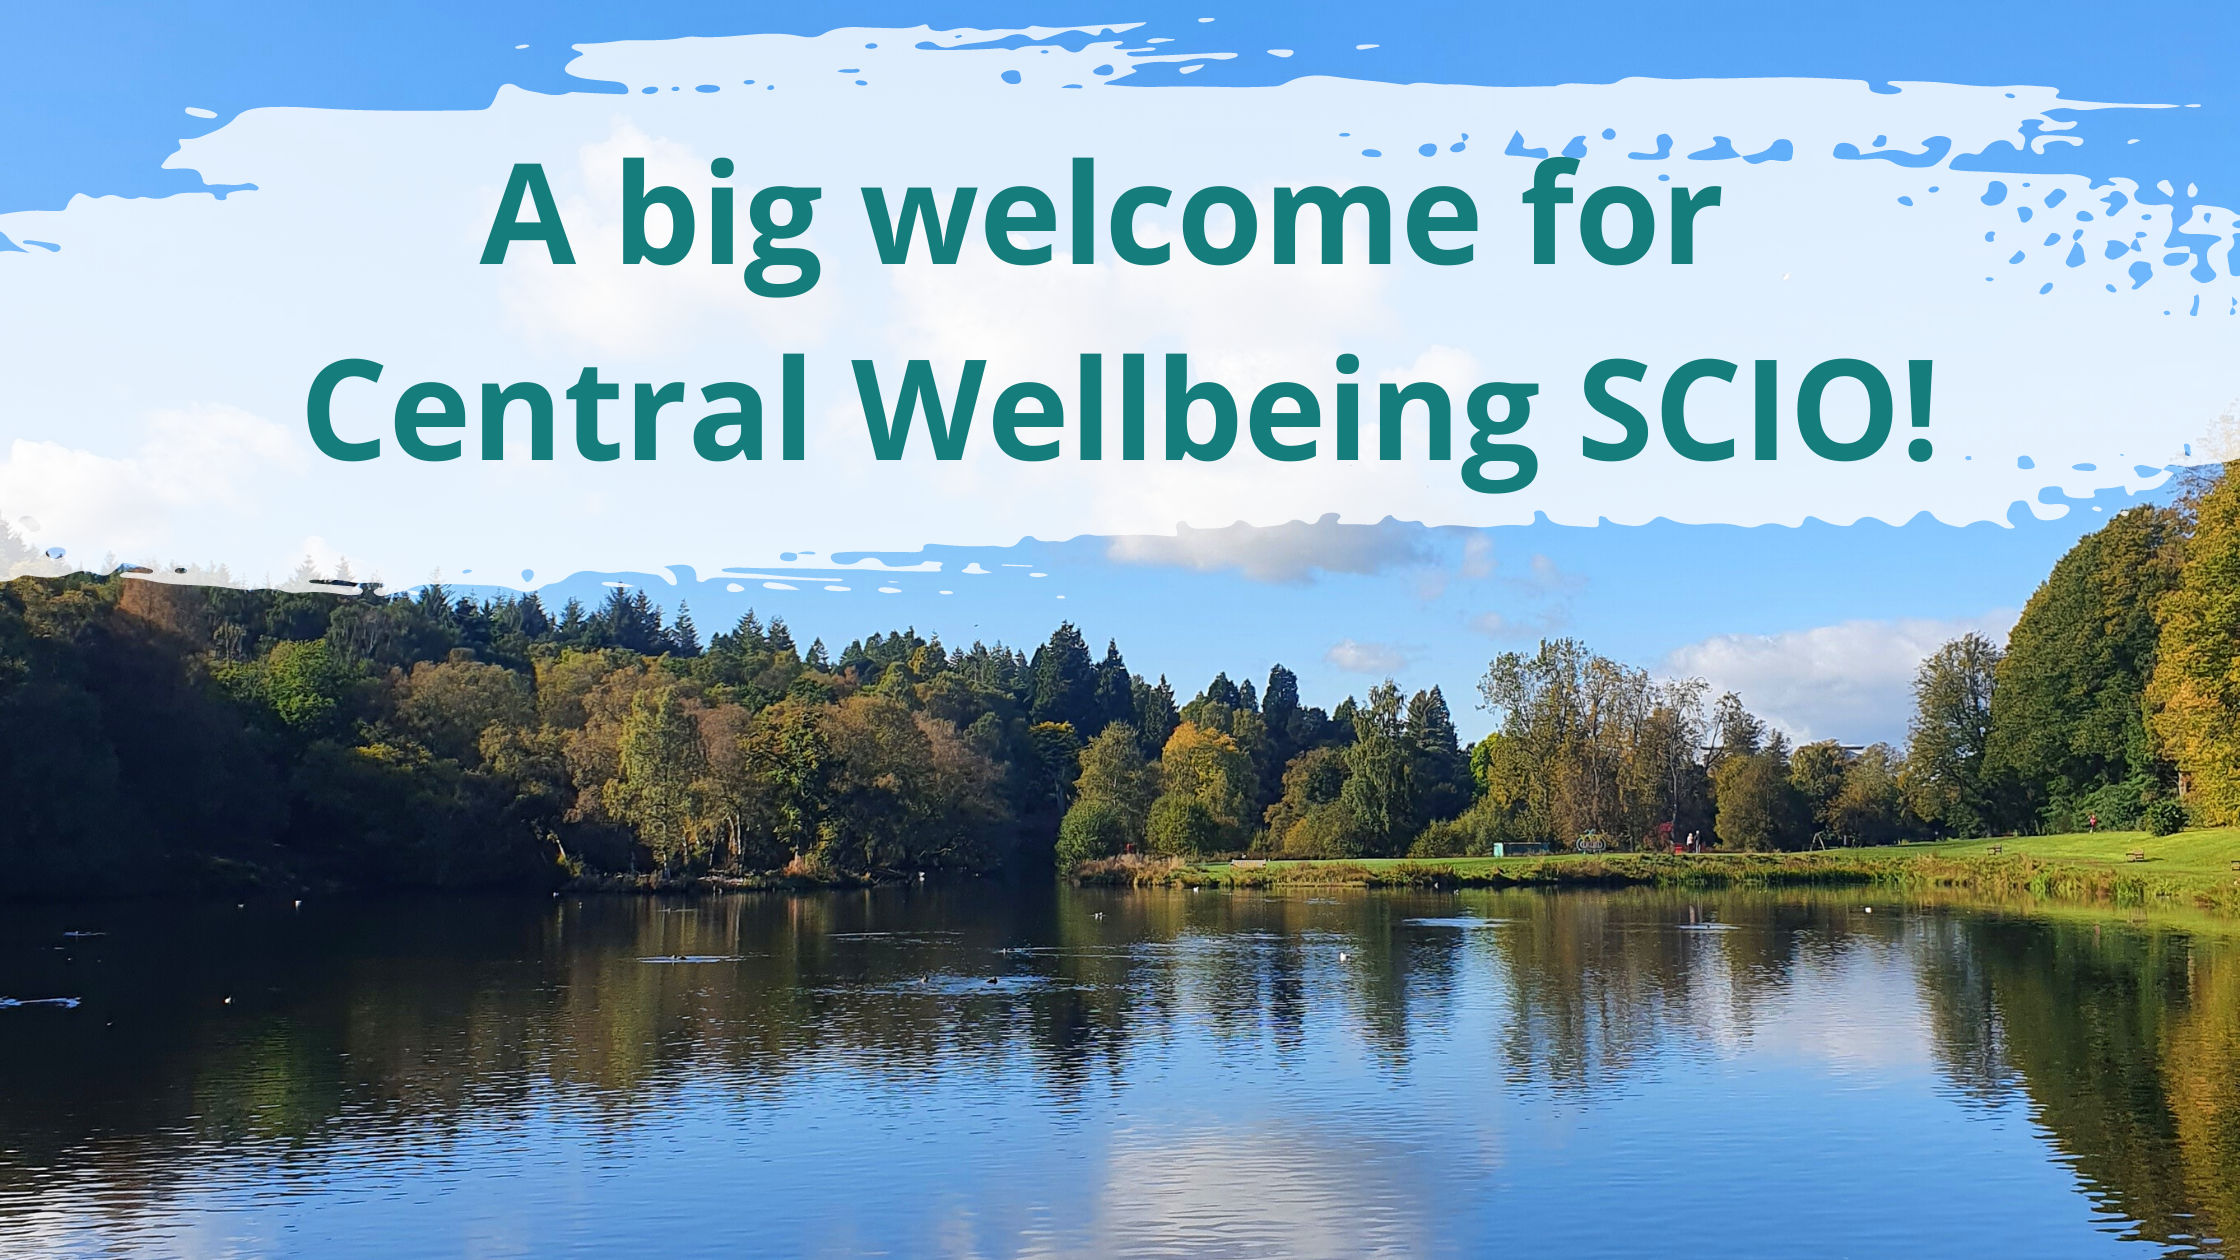 A big welcome for Central Wellbeing SCIO! A sunny lake and trees